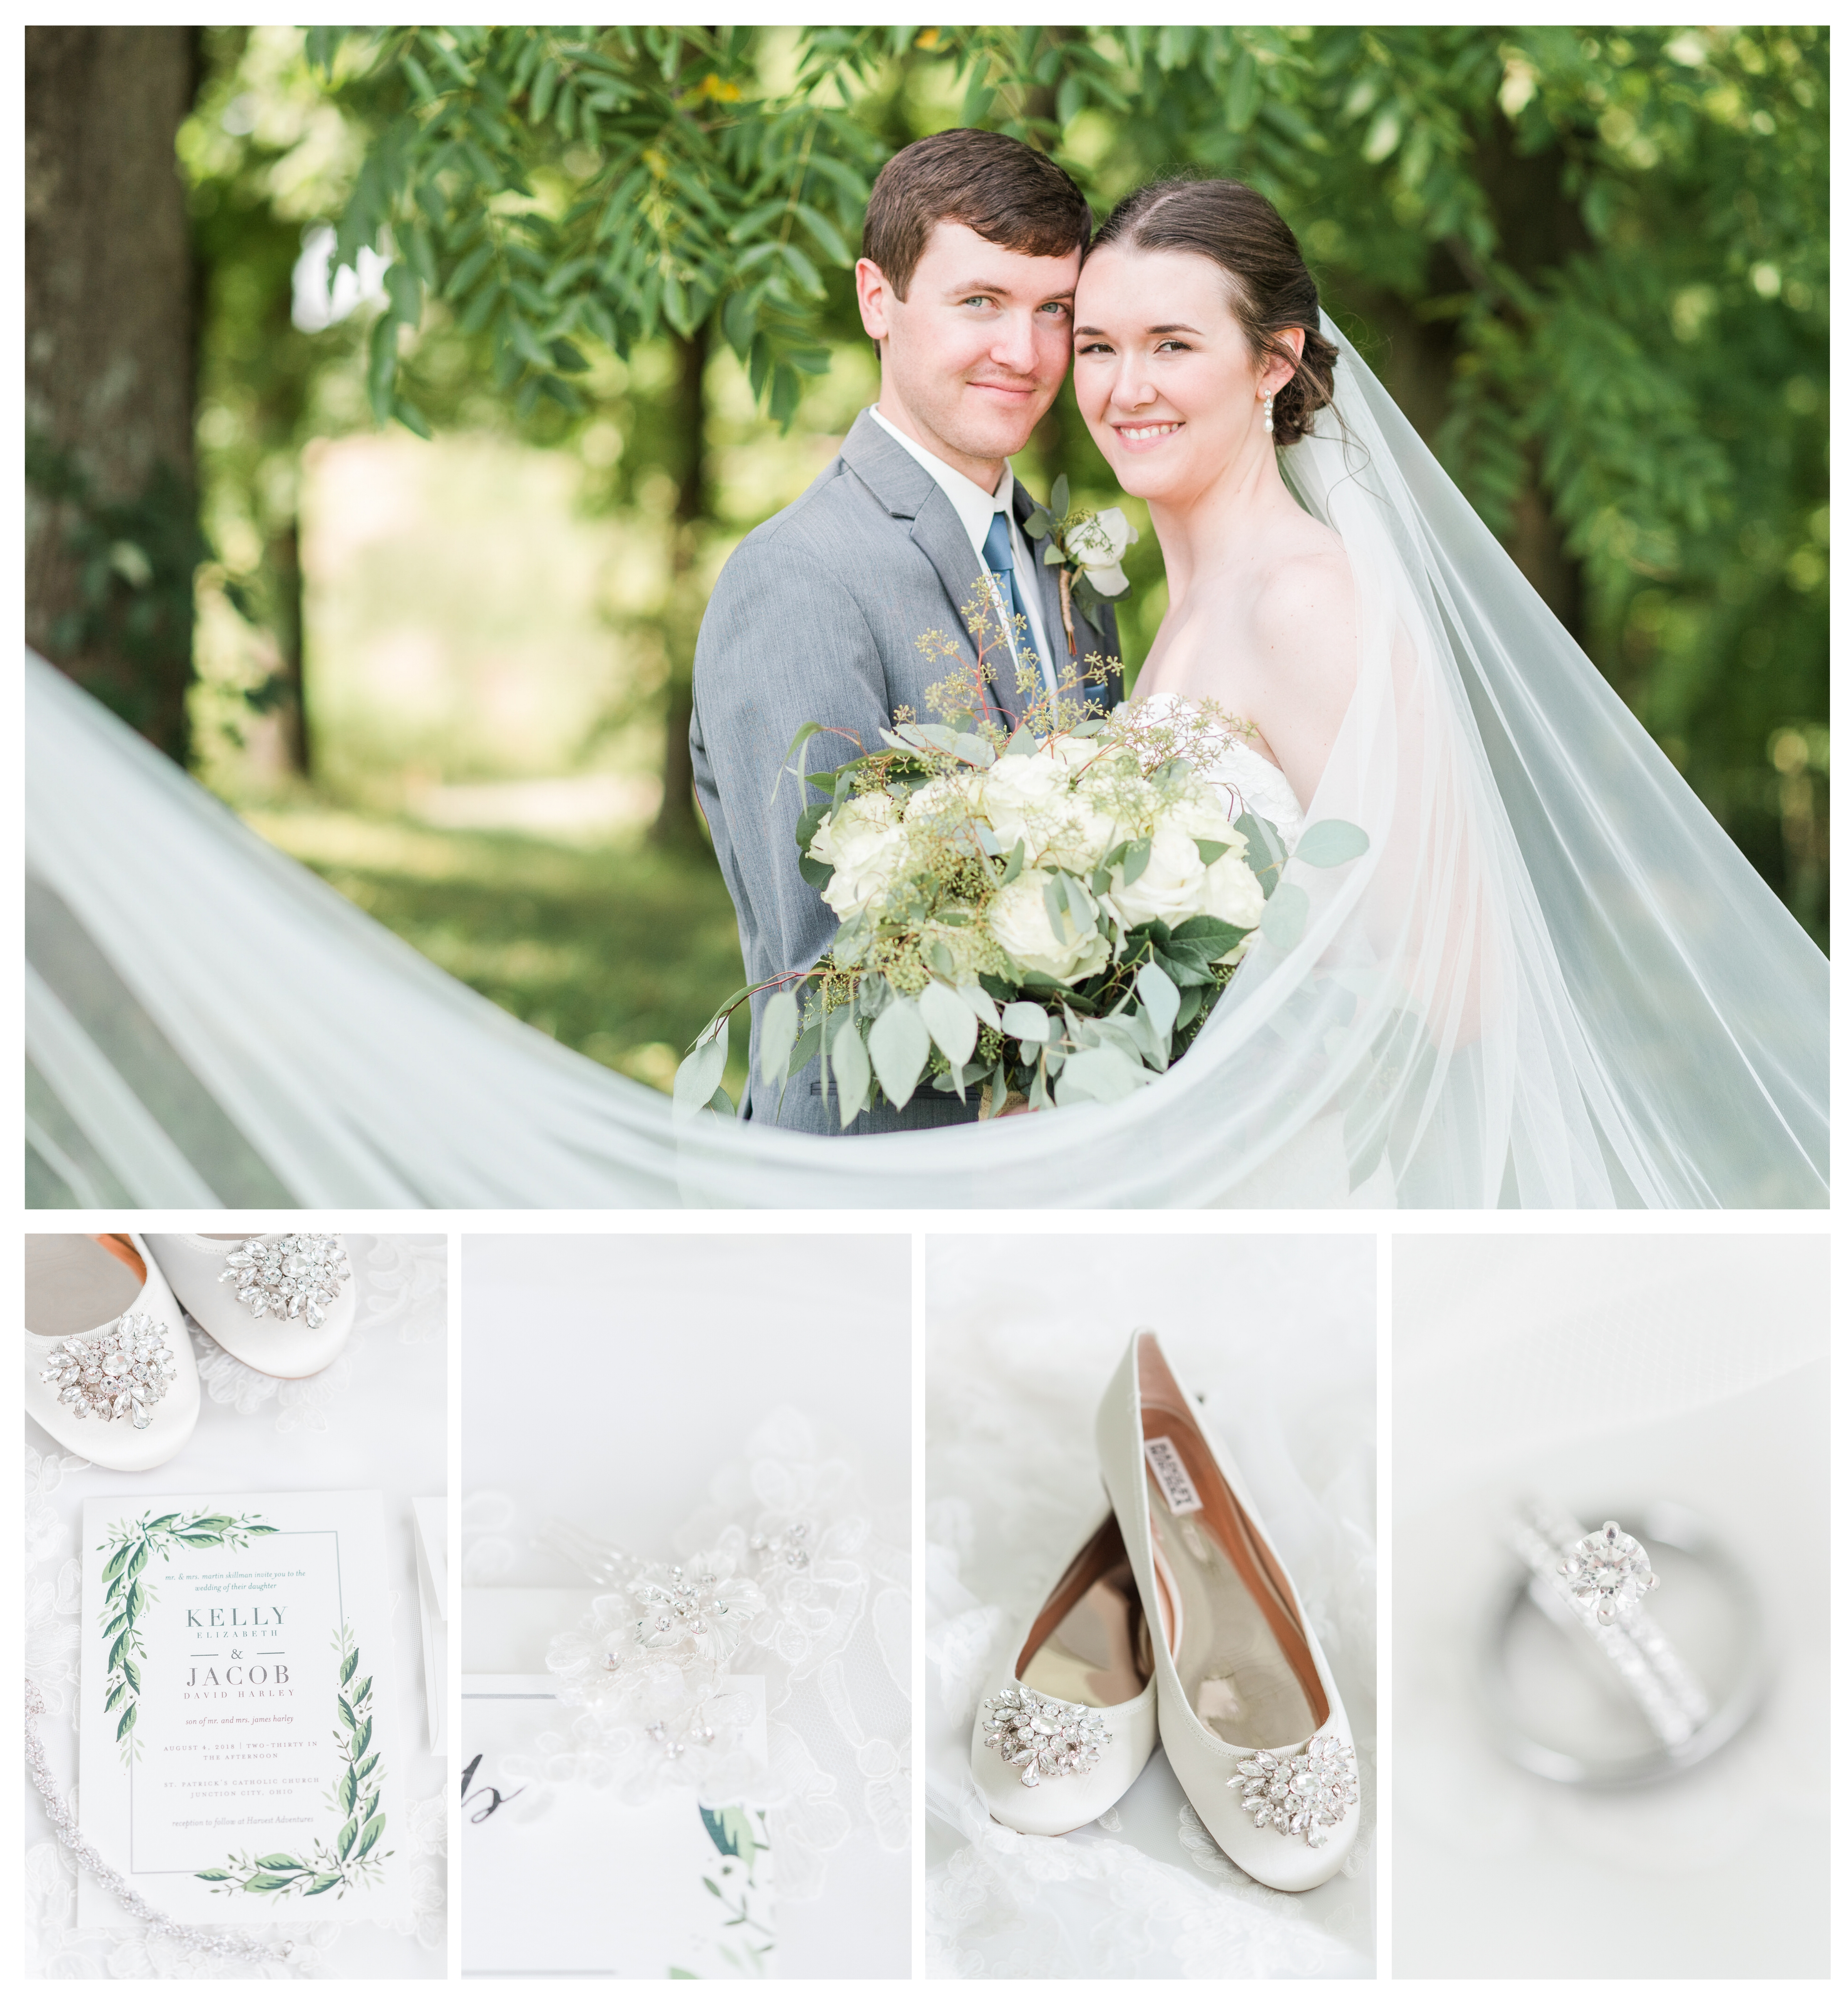 Bremen Ohio Wedding photos. Bride and groom smiling at camera with veil. wedding shoes and wedding rings